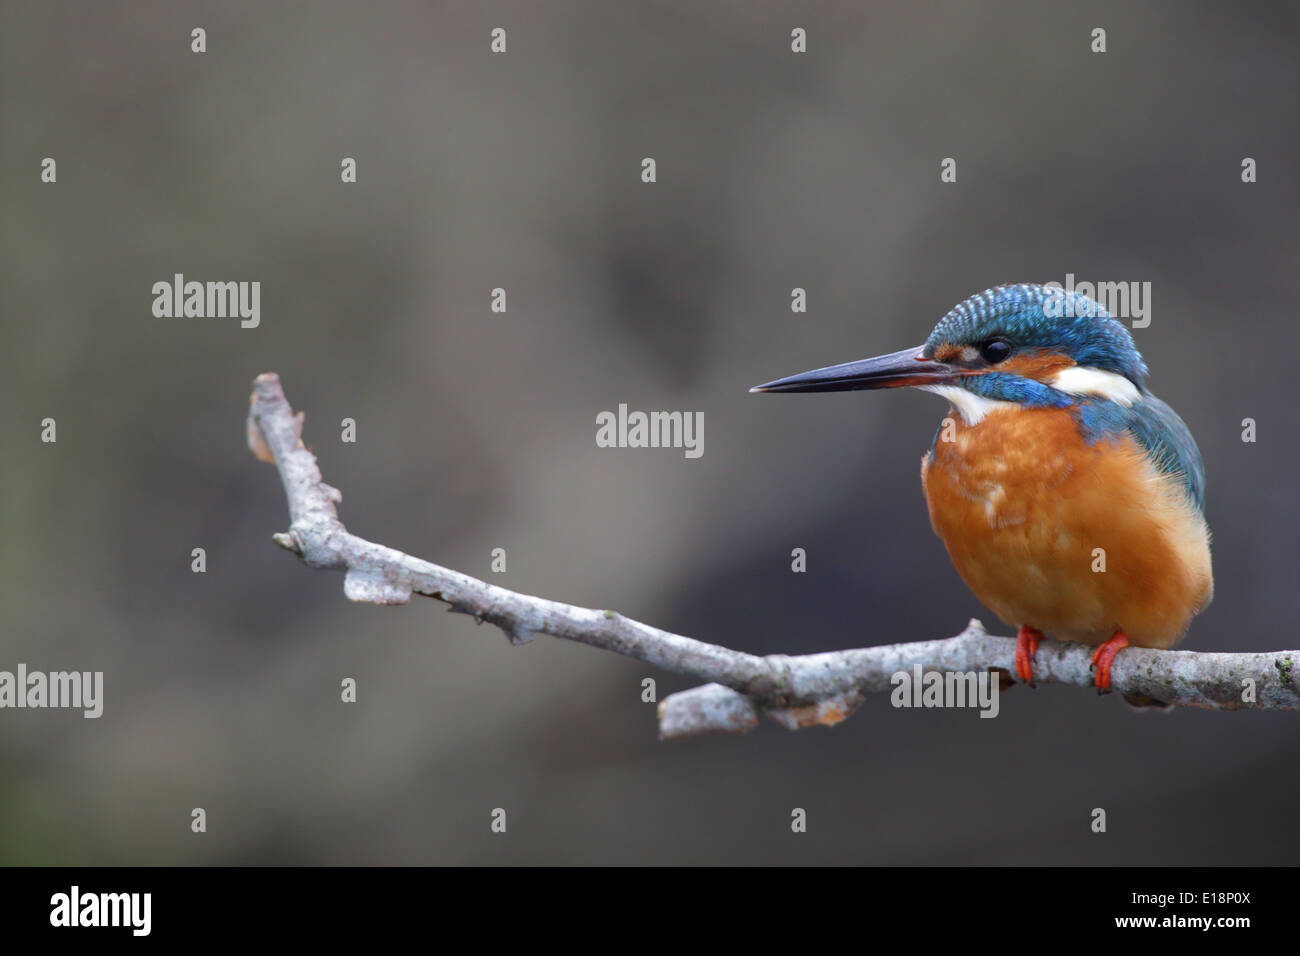 Kingfisher (Alcedo atthis adultes) Banque D'Images